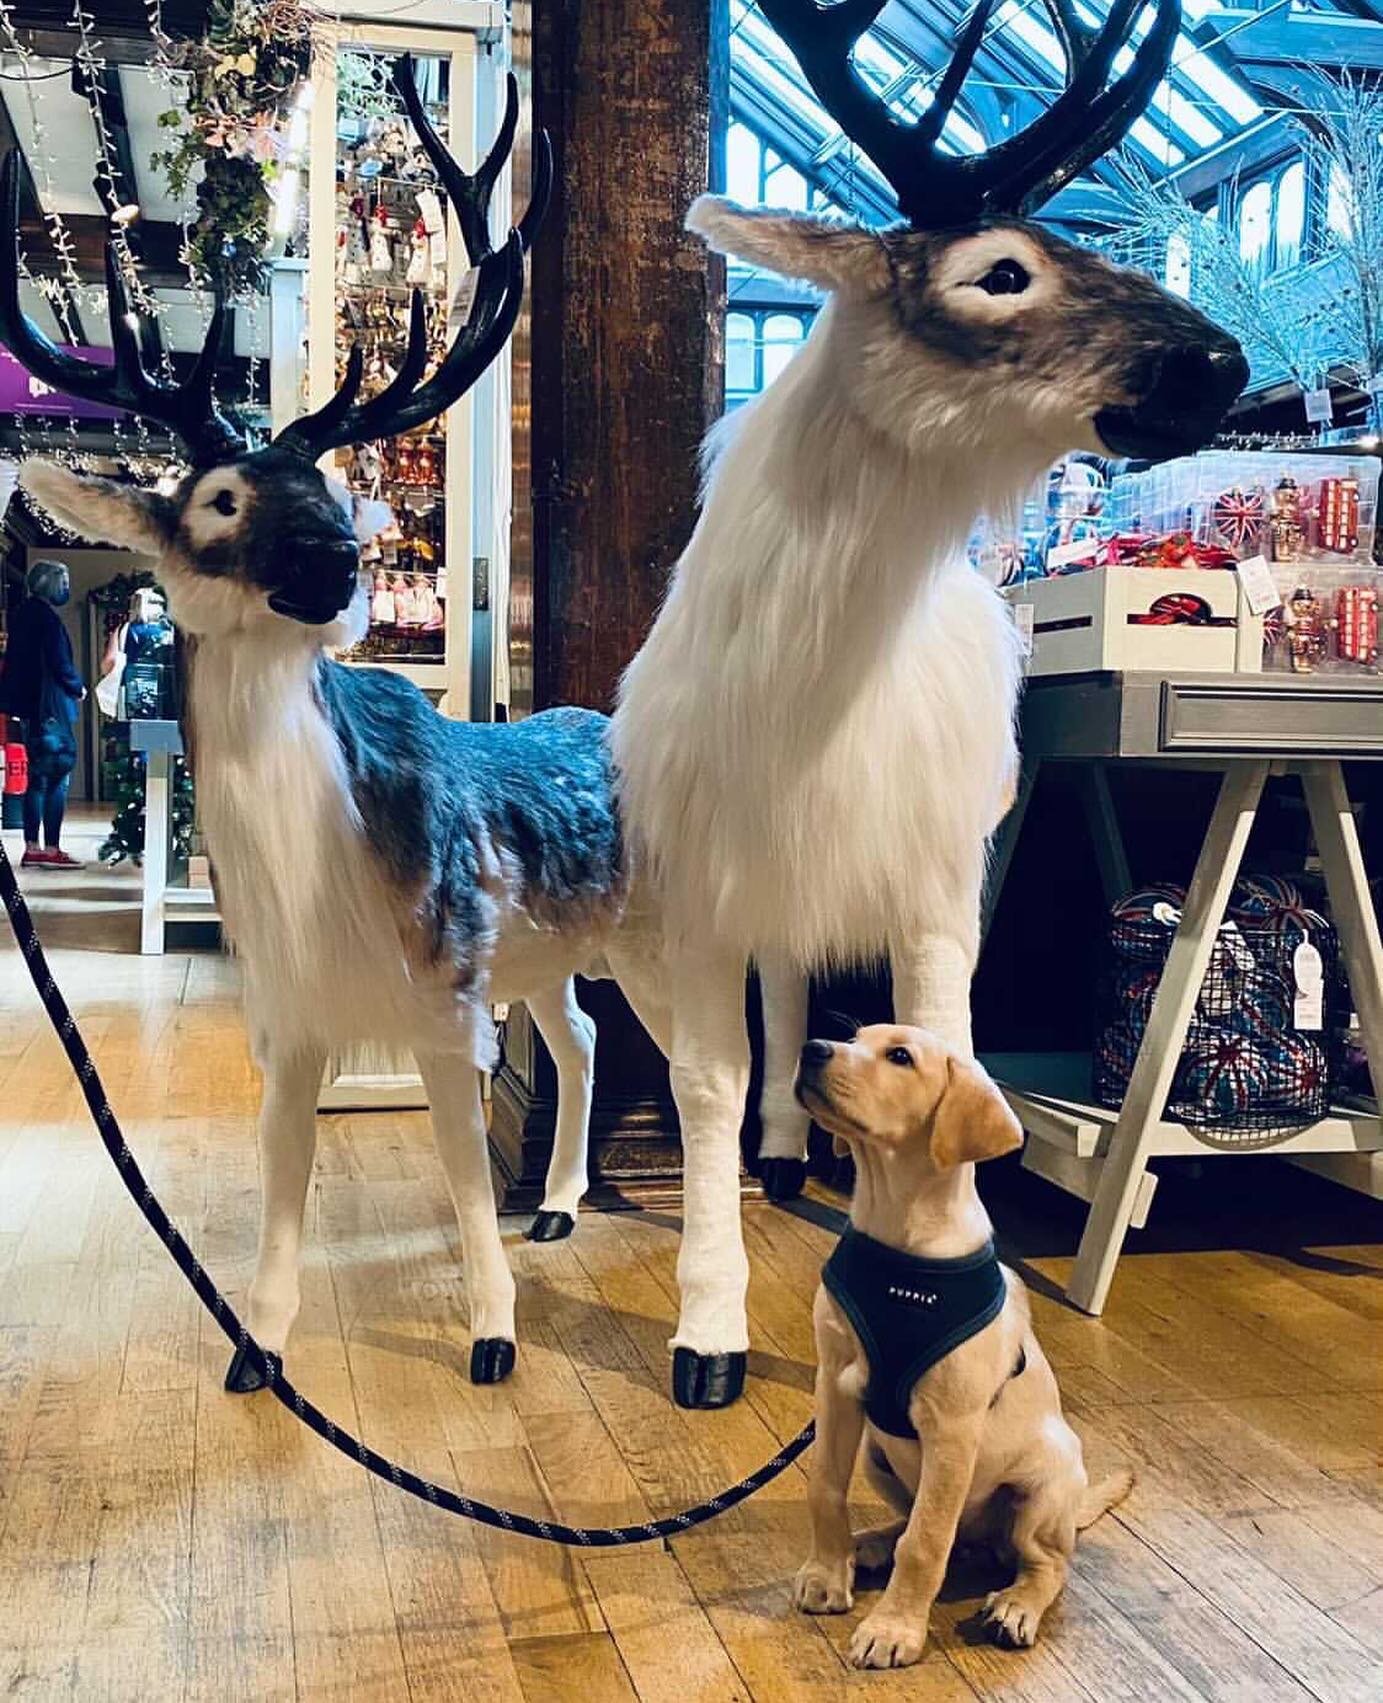 Peggy taking socialisation to a whole new level! Reindeers were not on my socialisation chart! But ✔️ anyway! Well done team. #reindeer #christmas #fun #dogpodcast #puppysocialisation #puppysocialization #communicate #engage #care #love #dogtraineron